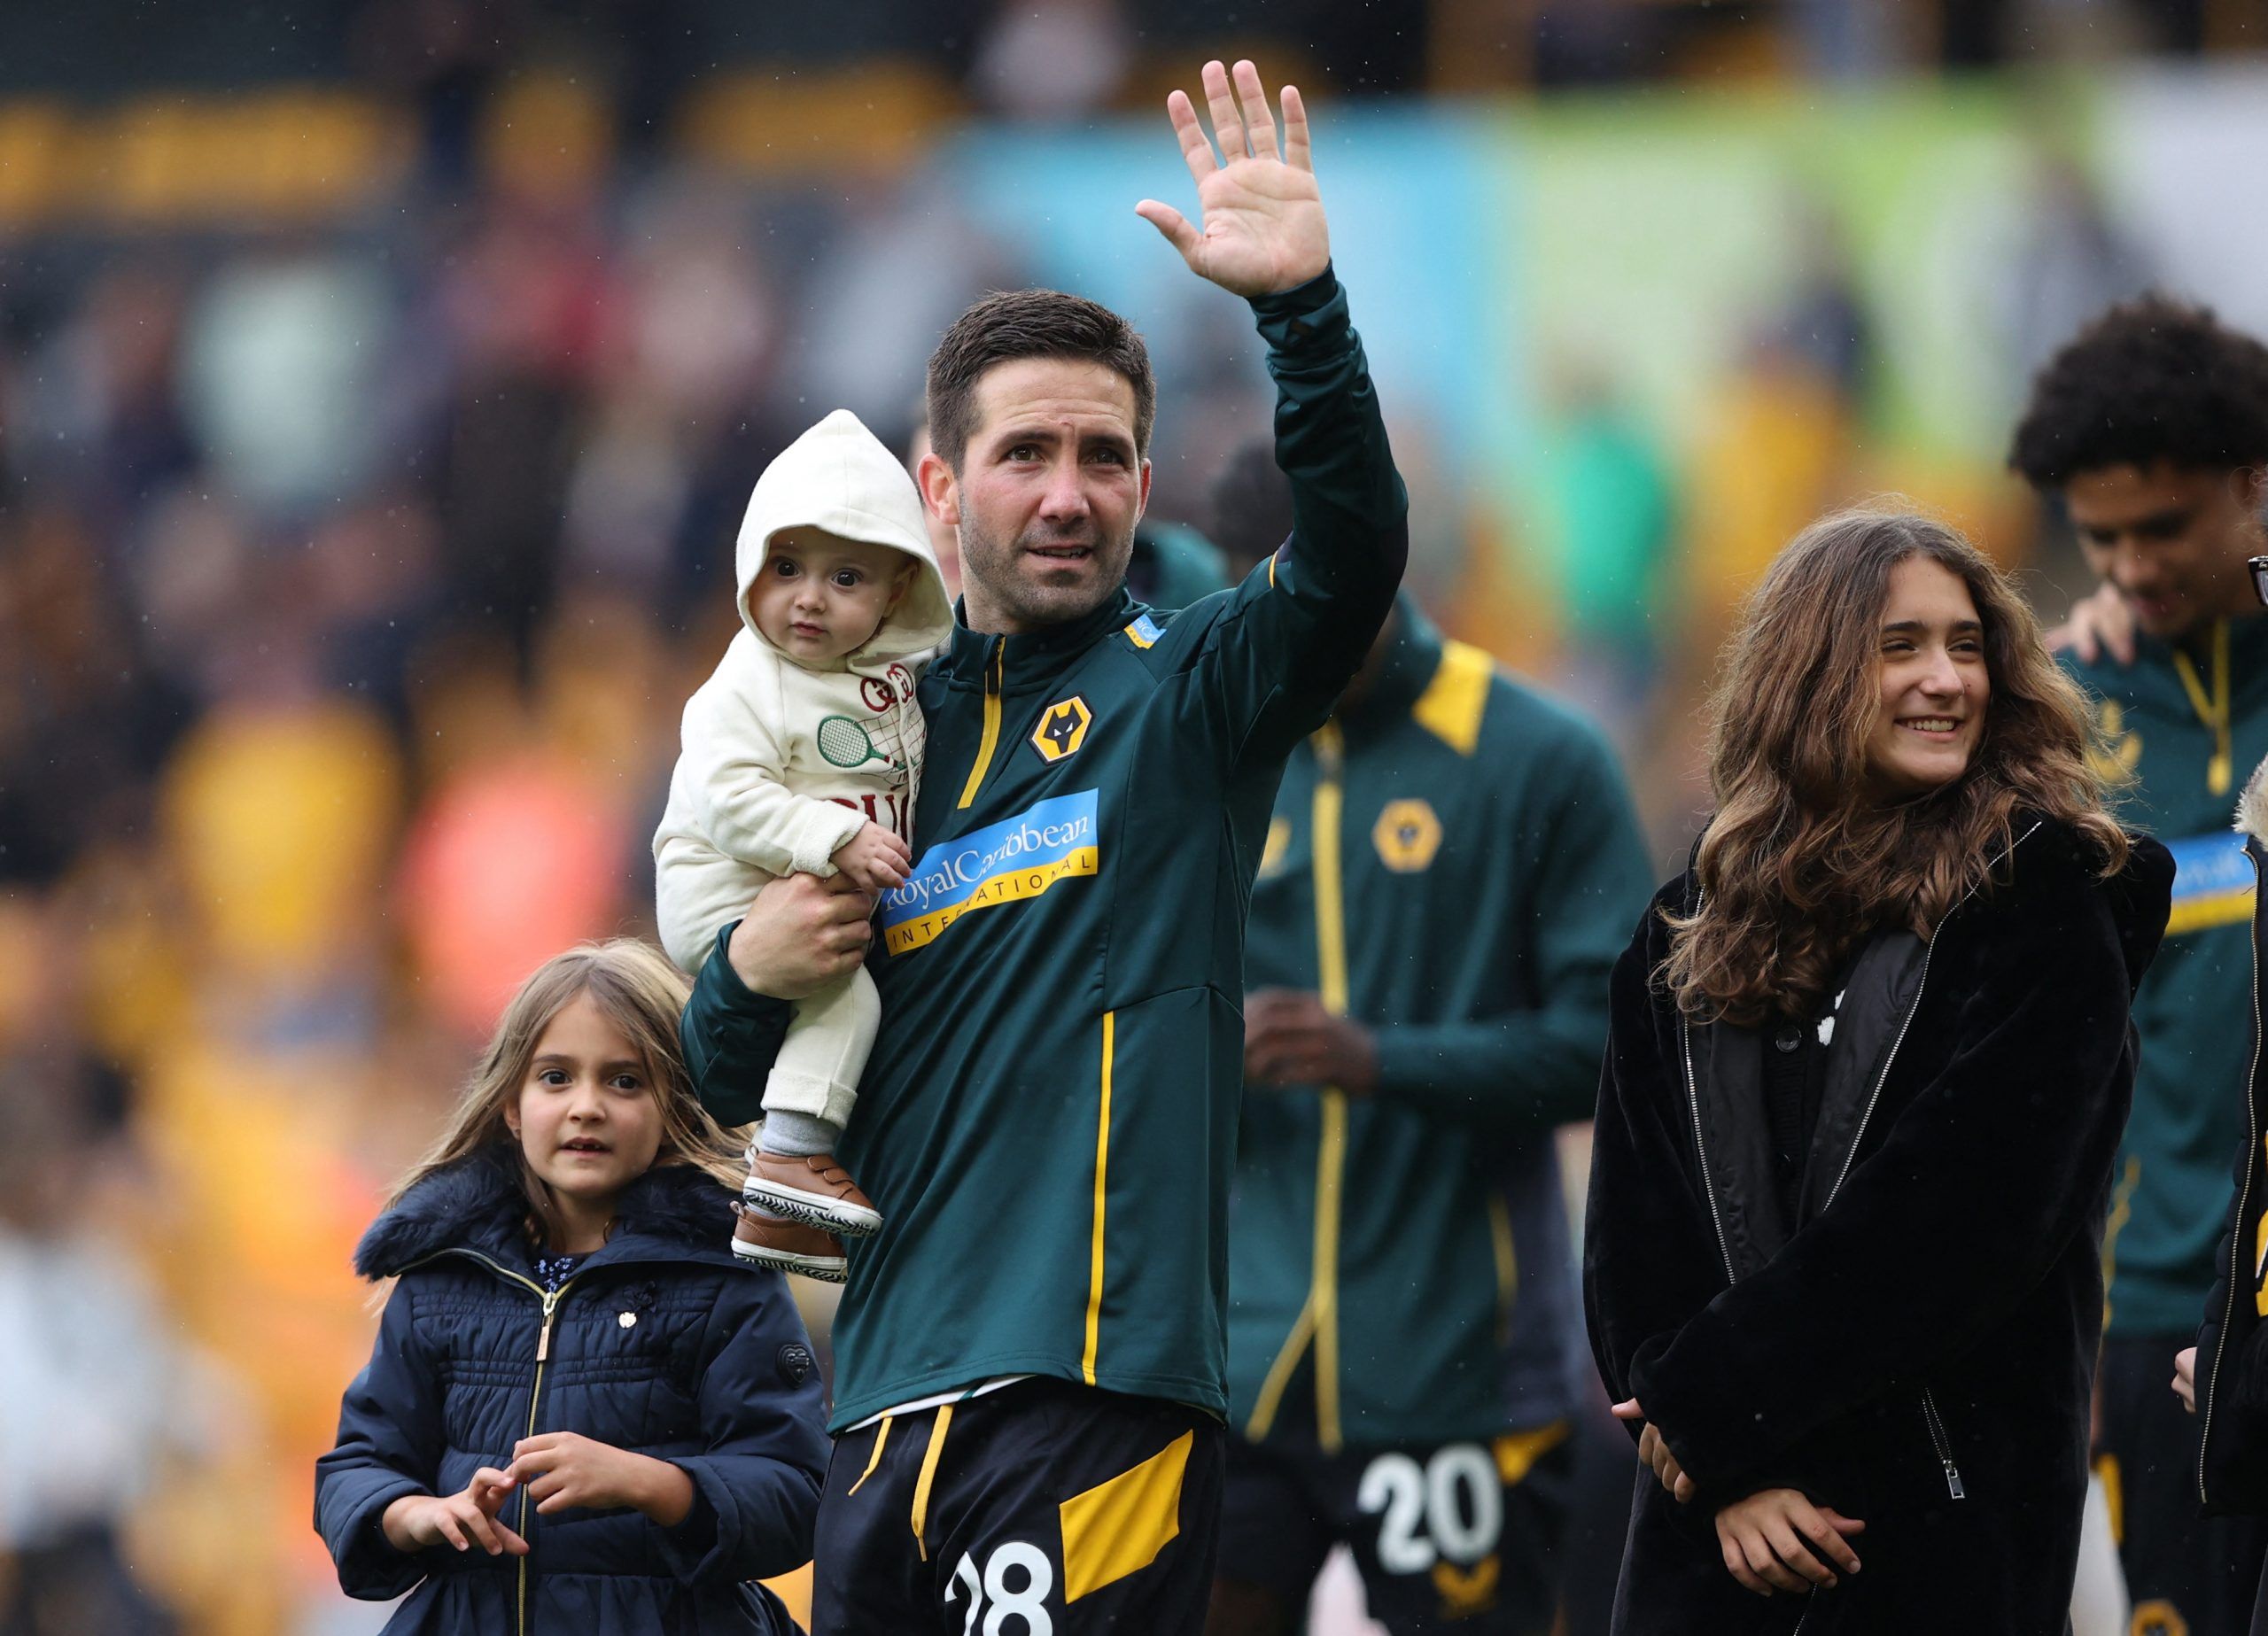 Soccer Football - Premier League - Wolverhampton Wanderers v Norwich City - Molineux Stadium, Wolverhampton, Britain - May 15, 2022 Wolverhampton Wanderers' Joao Moutinho with family on the pitch after the match Action Images via Reuters/Molly Darlington EDITORIAL USE ONLY. No use with unauthorized audio, video, data, fixture lists, club/league logos or 'live' services. Online in-match use limited to 75 images, no video emulation. No use in betting, games or single club /league/player publicatio